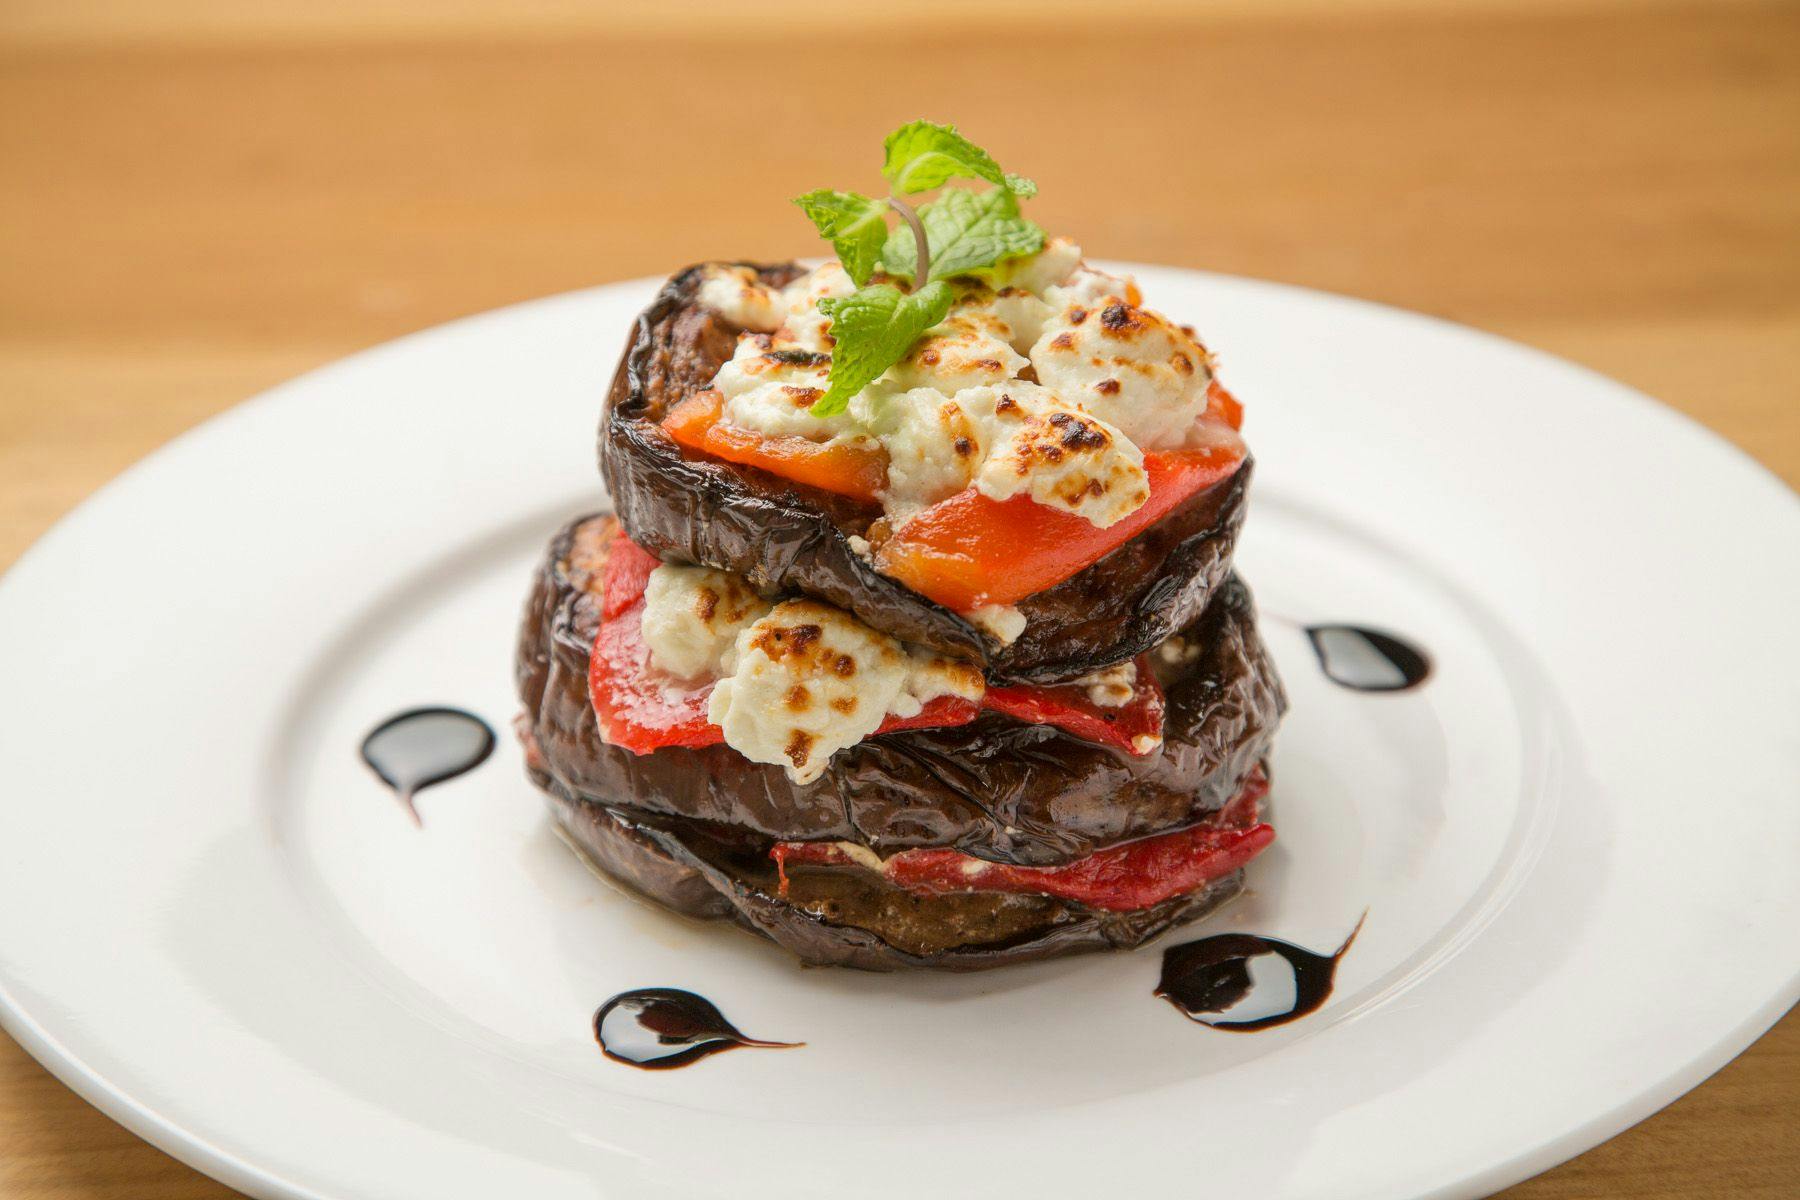 Plate of eggplant tower